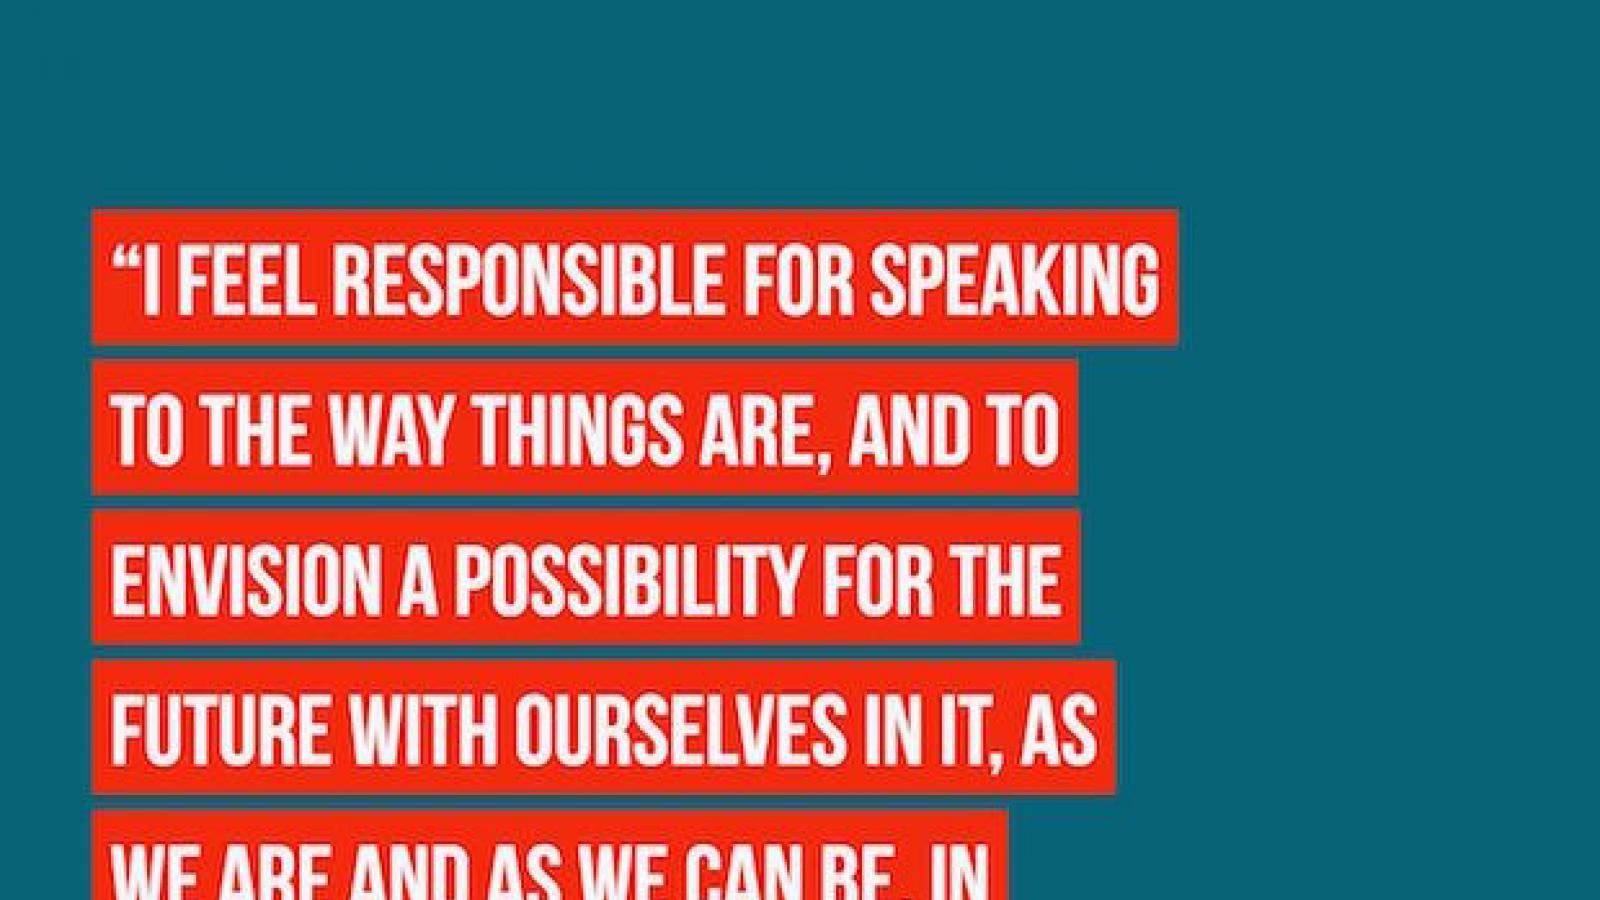 I feel responsible for speaking to the way things are and to envision a possibility for the future with ourselves in nit as we are and as we can be in positive ways... Merritt Johnson